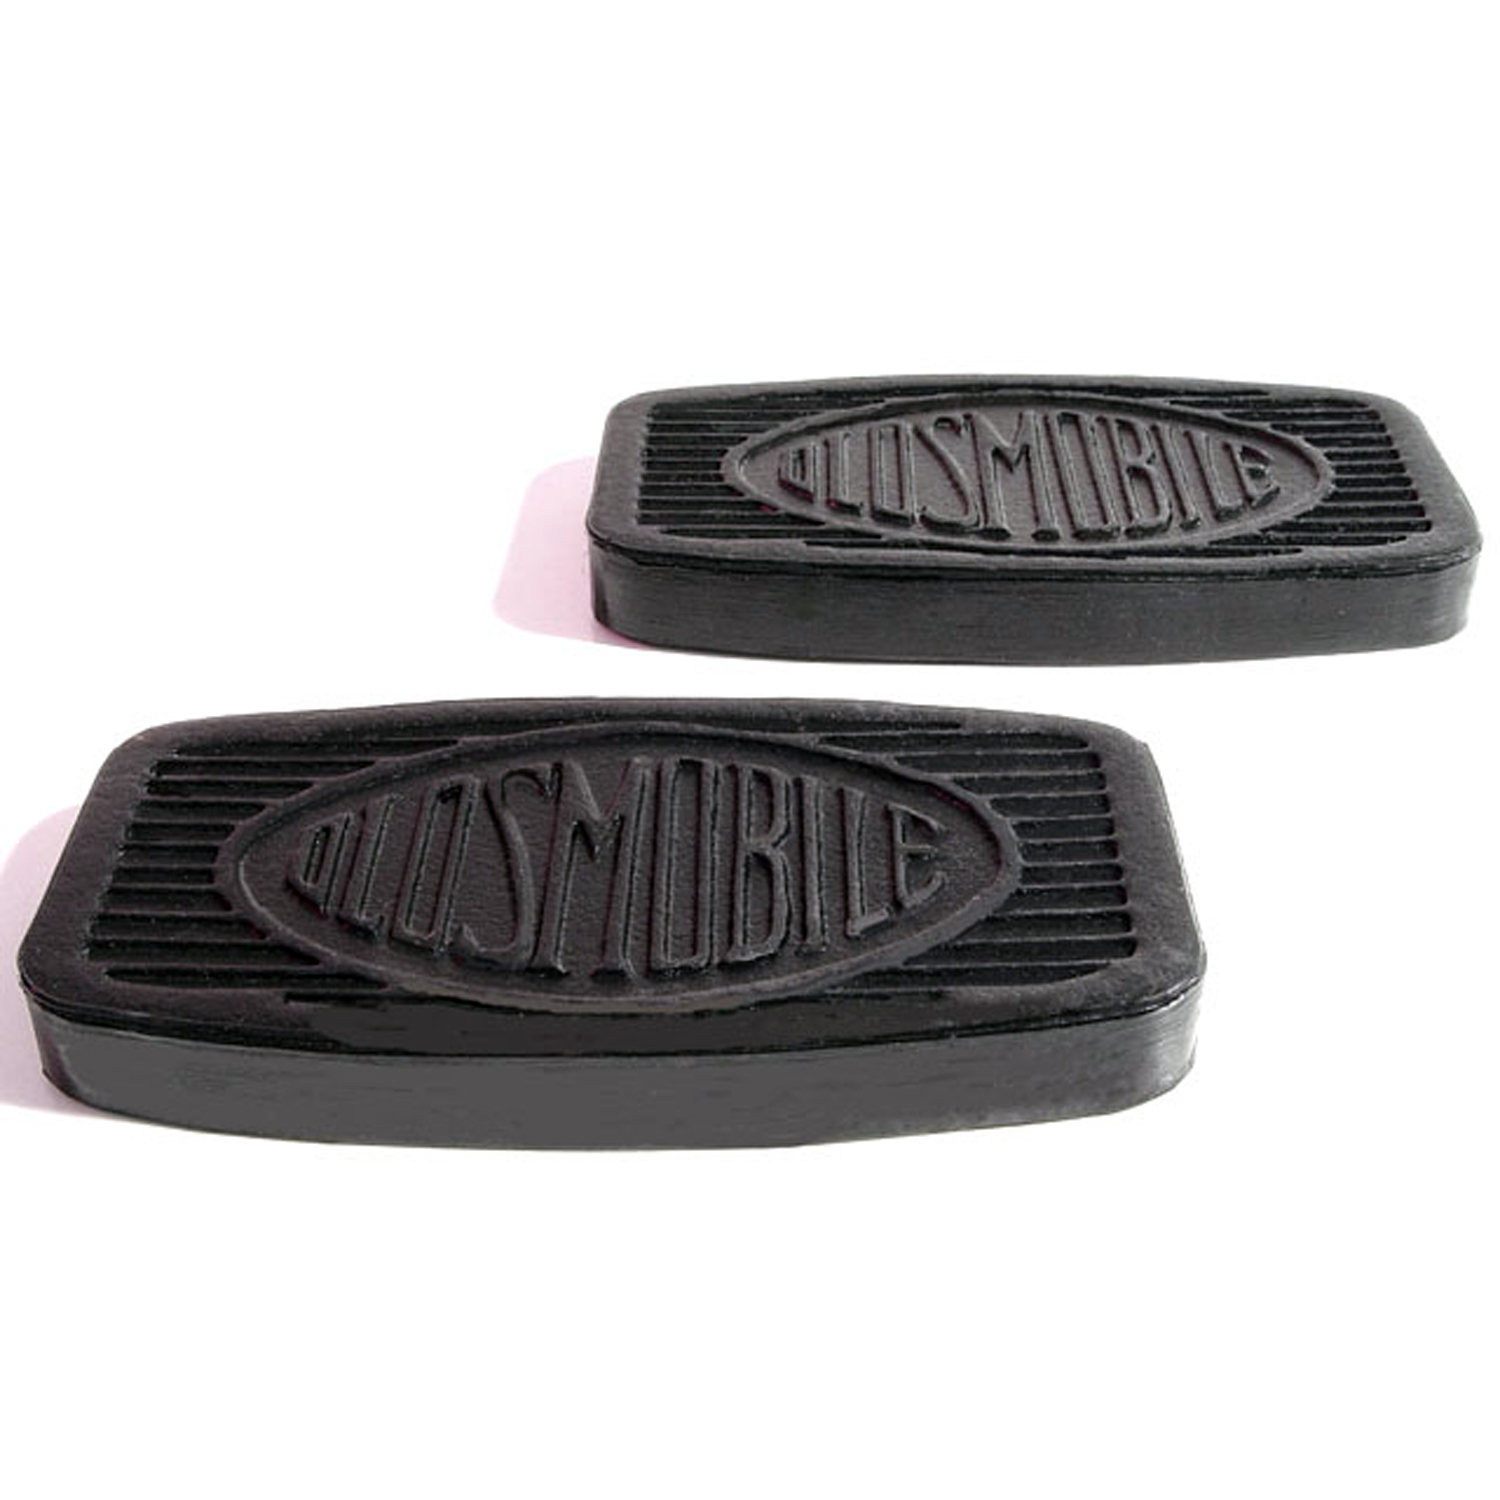 1932 Oldsmobile Model F-32 Clutch and Brake Pedal Pads.  3-1/2 wide X 1-3/16 long-CB 95